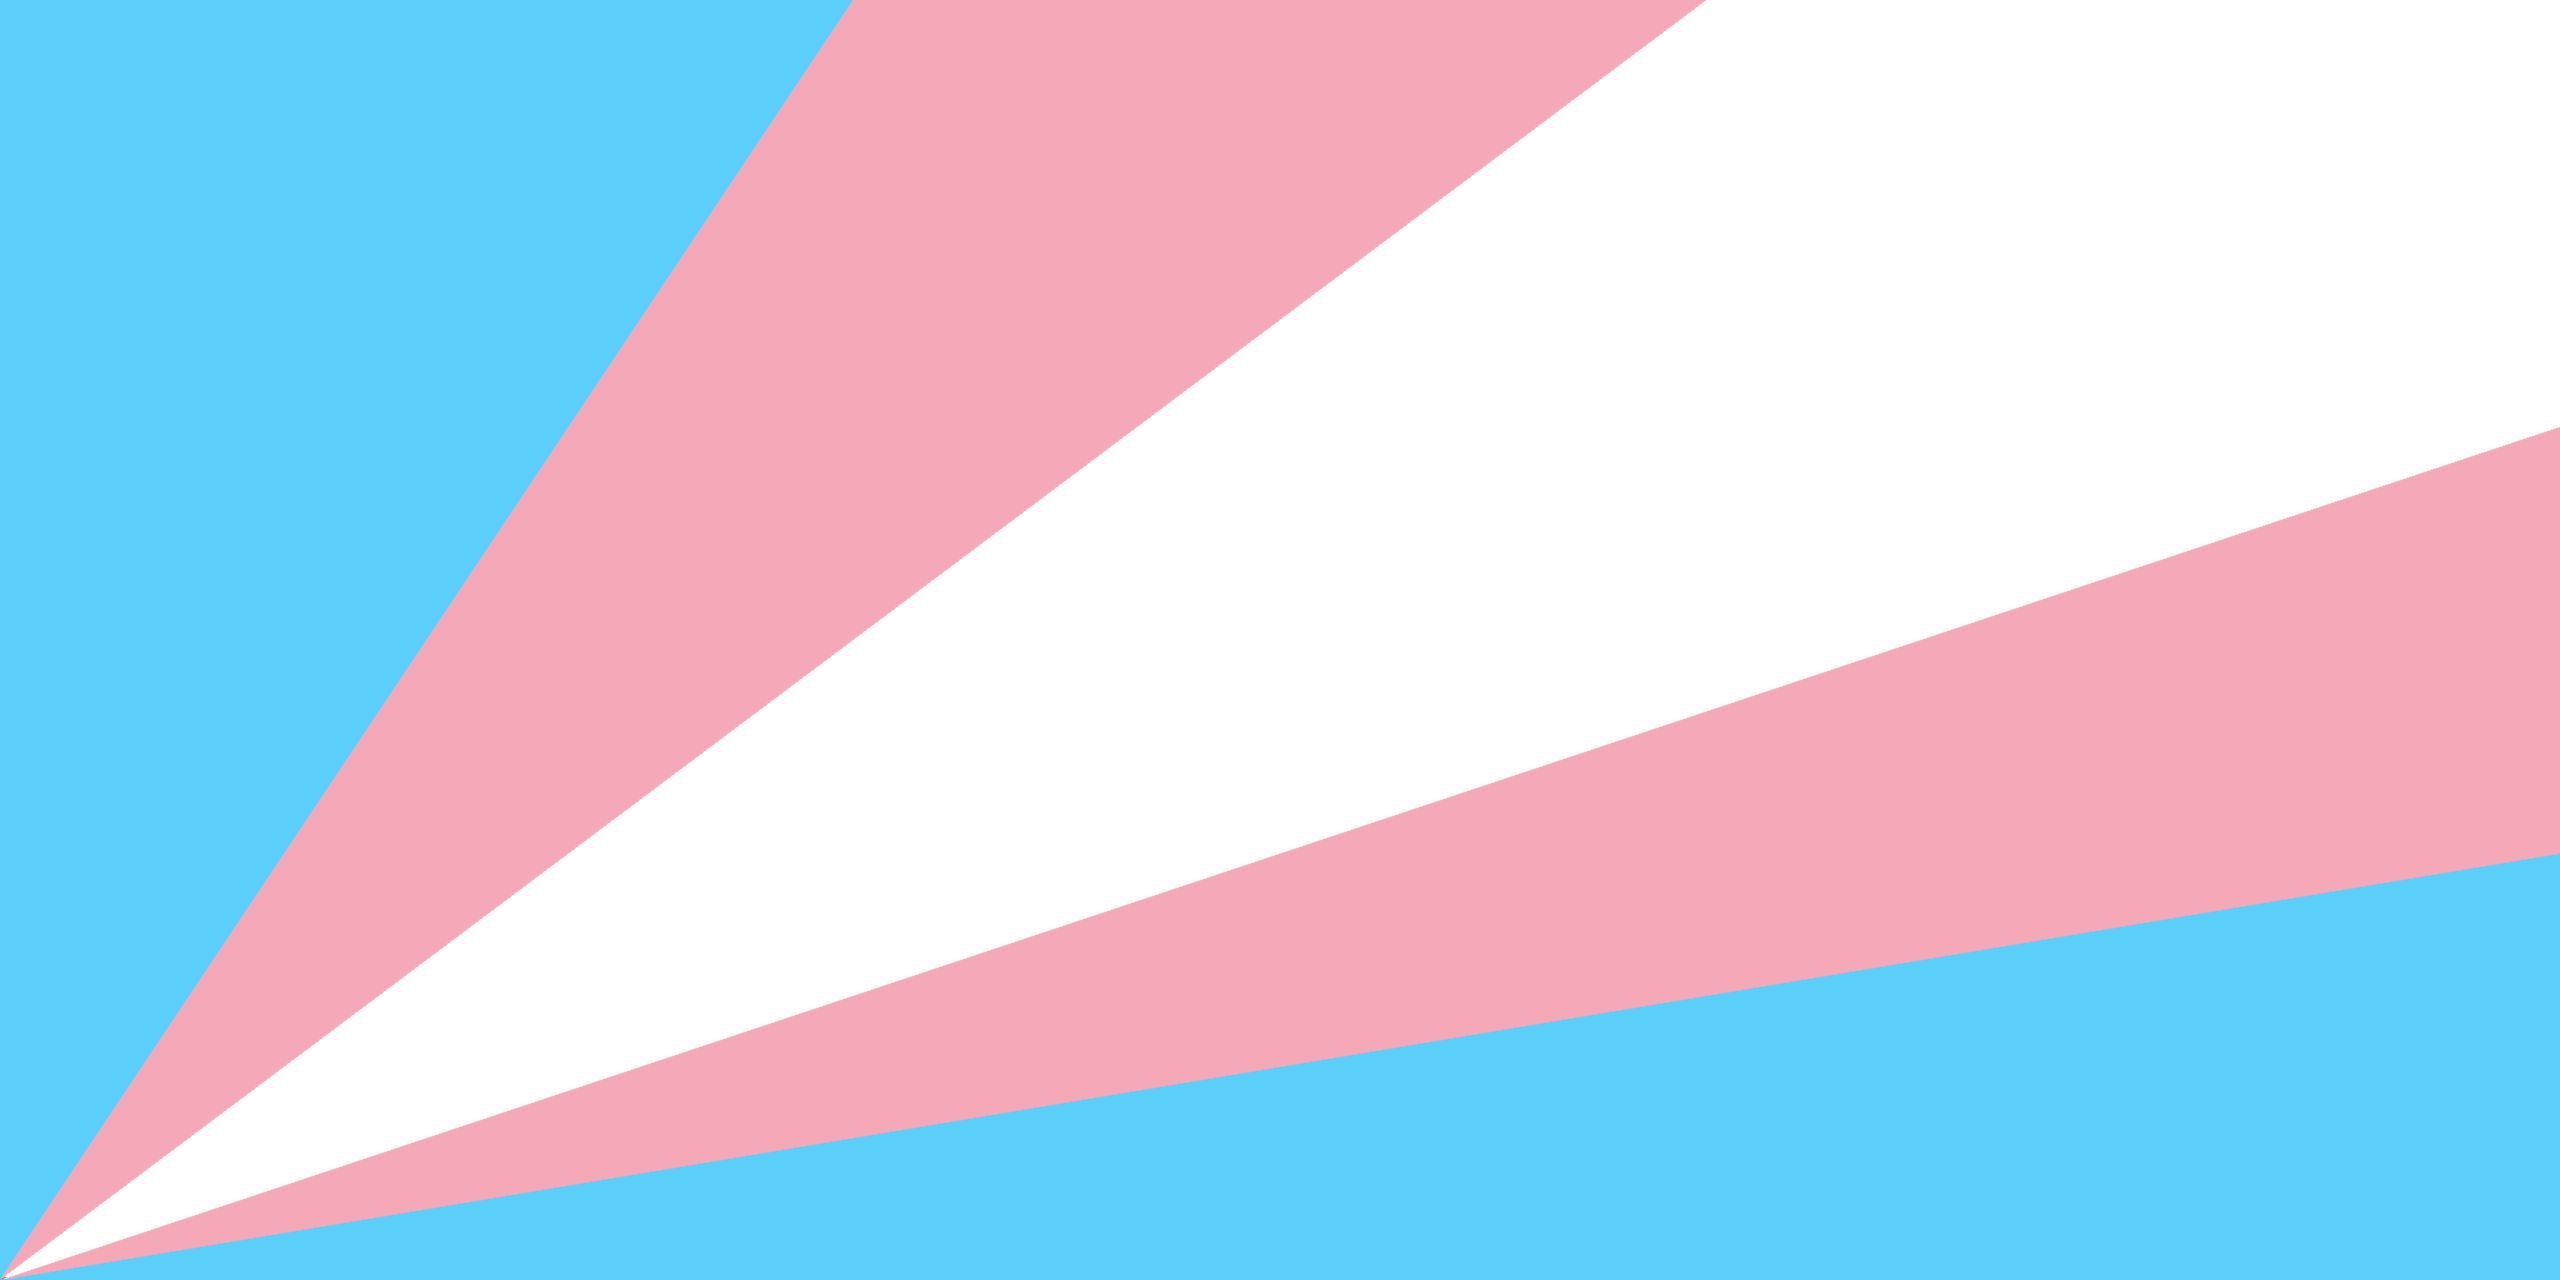 Trans pride flag distorted in the manner of the Seychelles flag